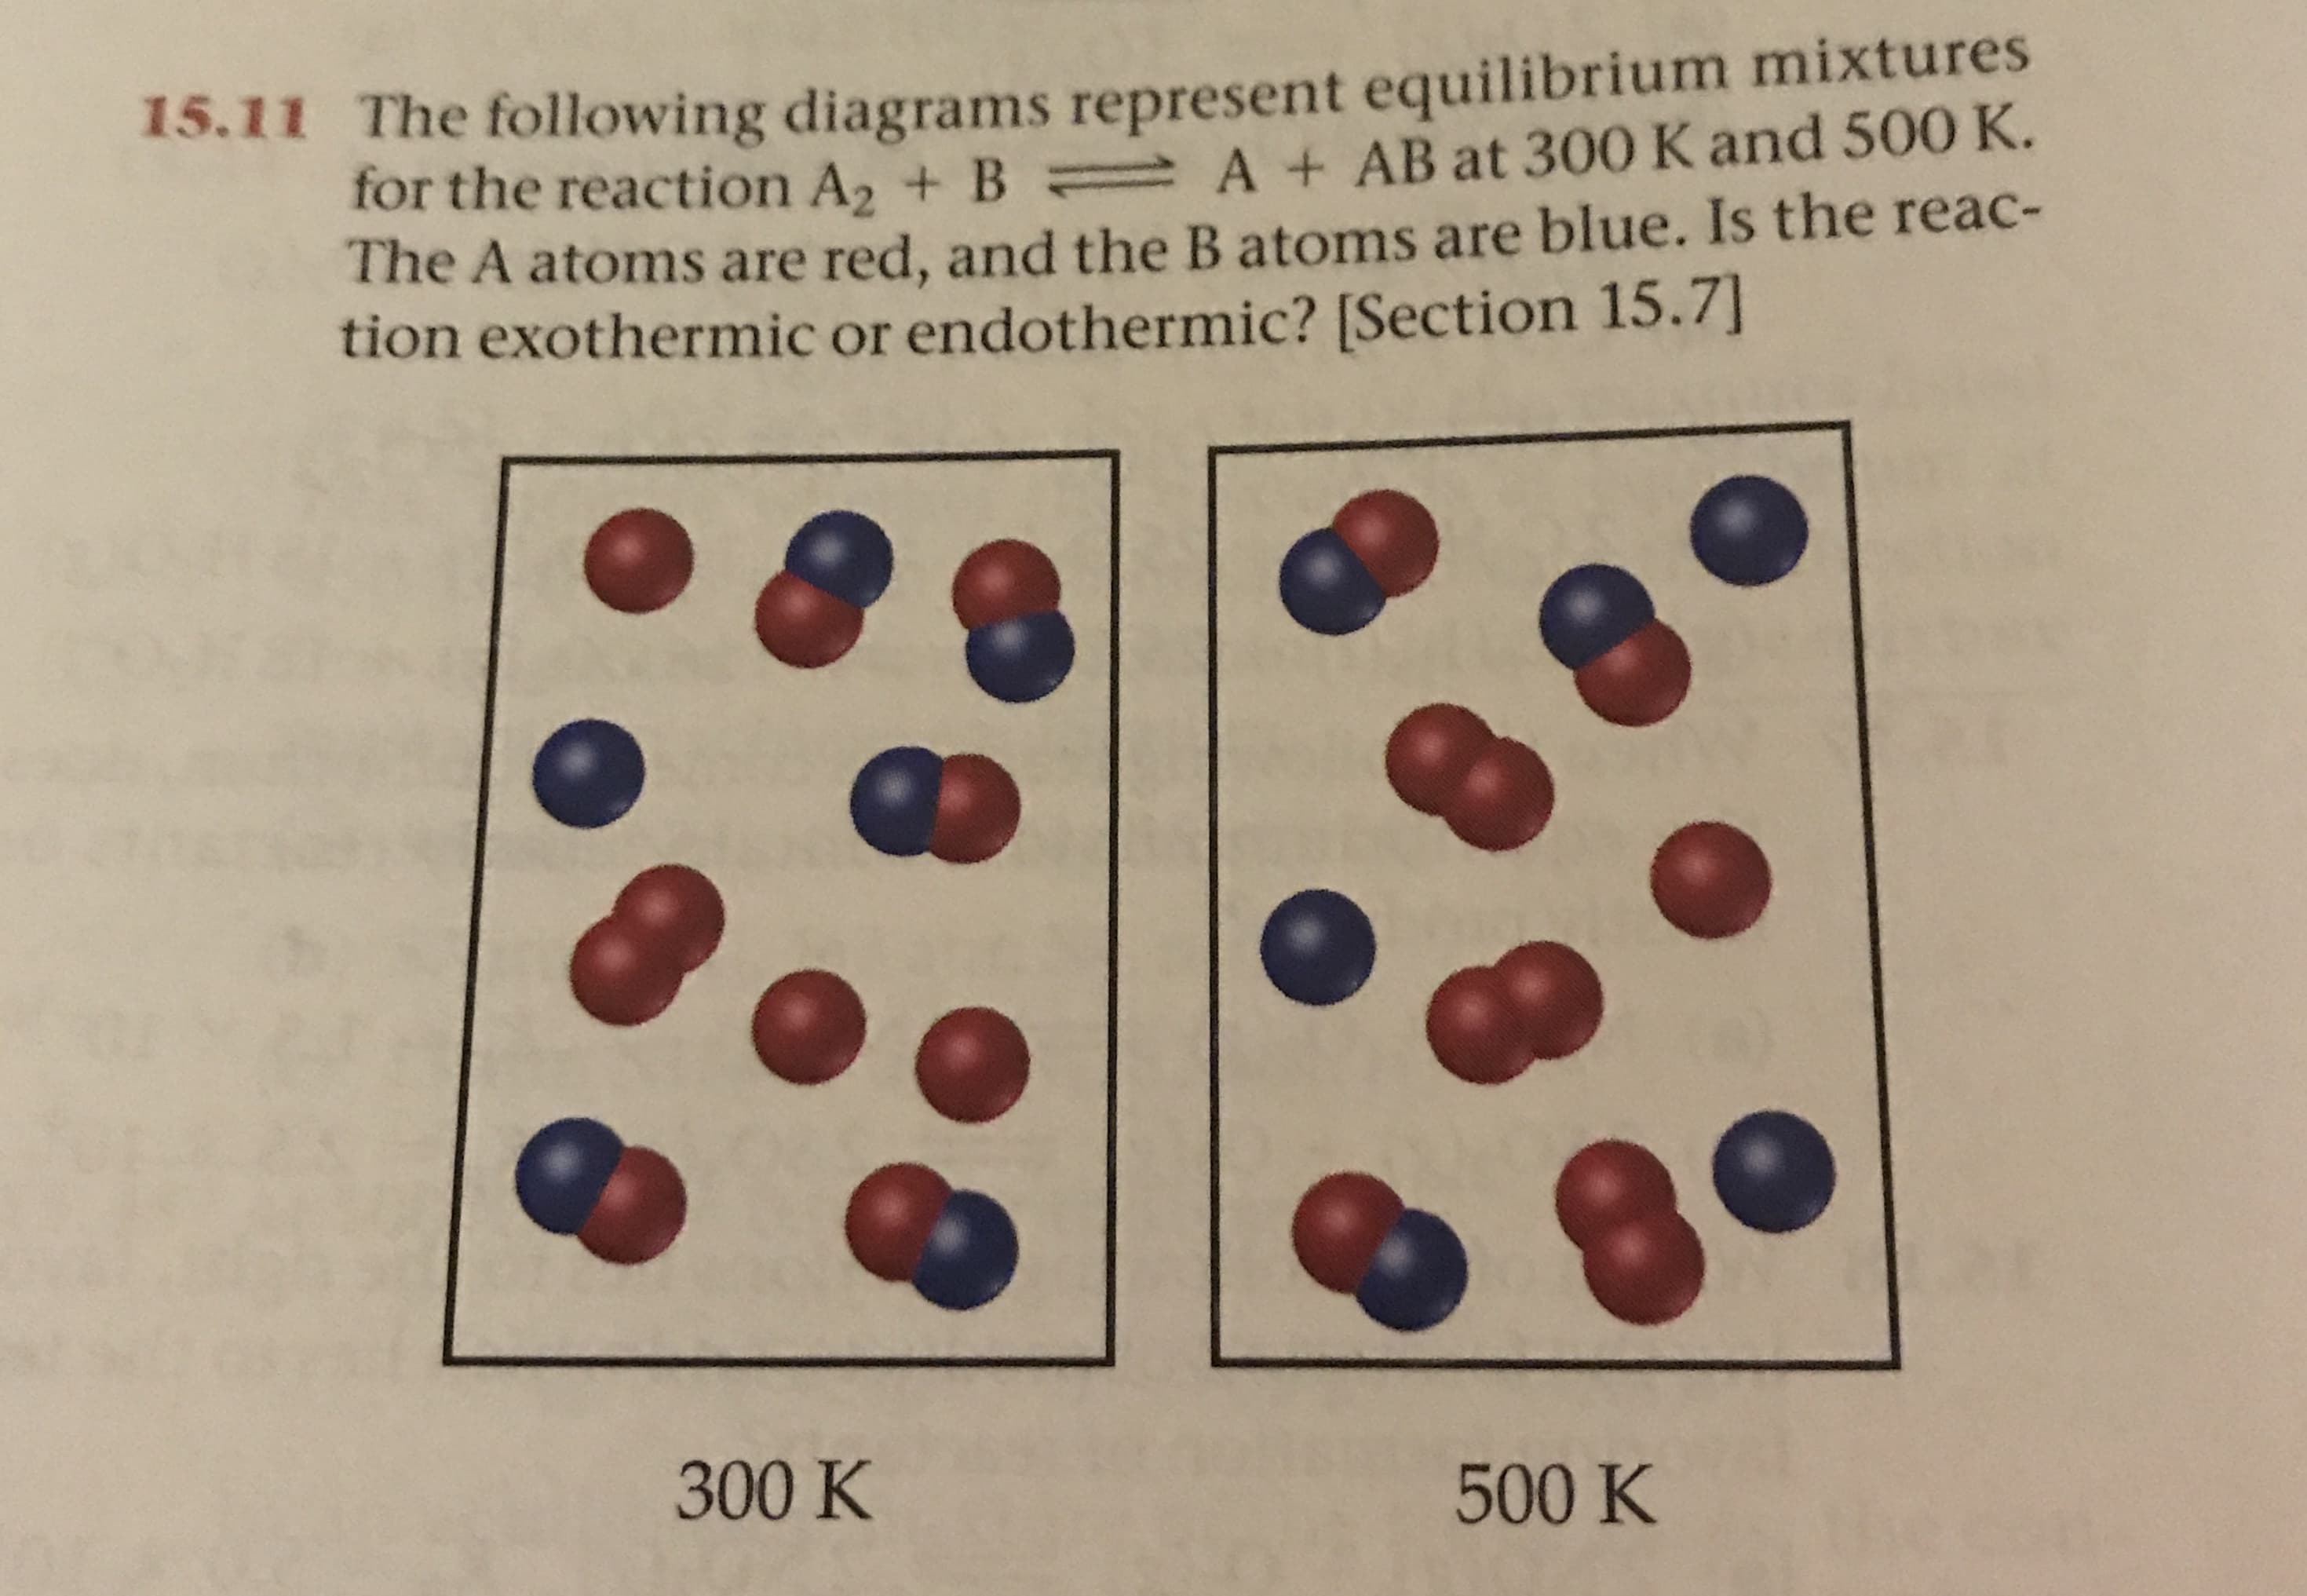 15.11 The following diagrams represent equilibrium mixtures
for the reaction A2 + B A+ AB at 300 K and 500 K.
The A atoms are red, and the B atoms are blue. Is the reac-
tion exothermic or endothermic? [Section 15.7]
300 K
500 K
